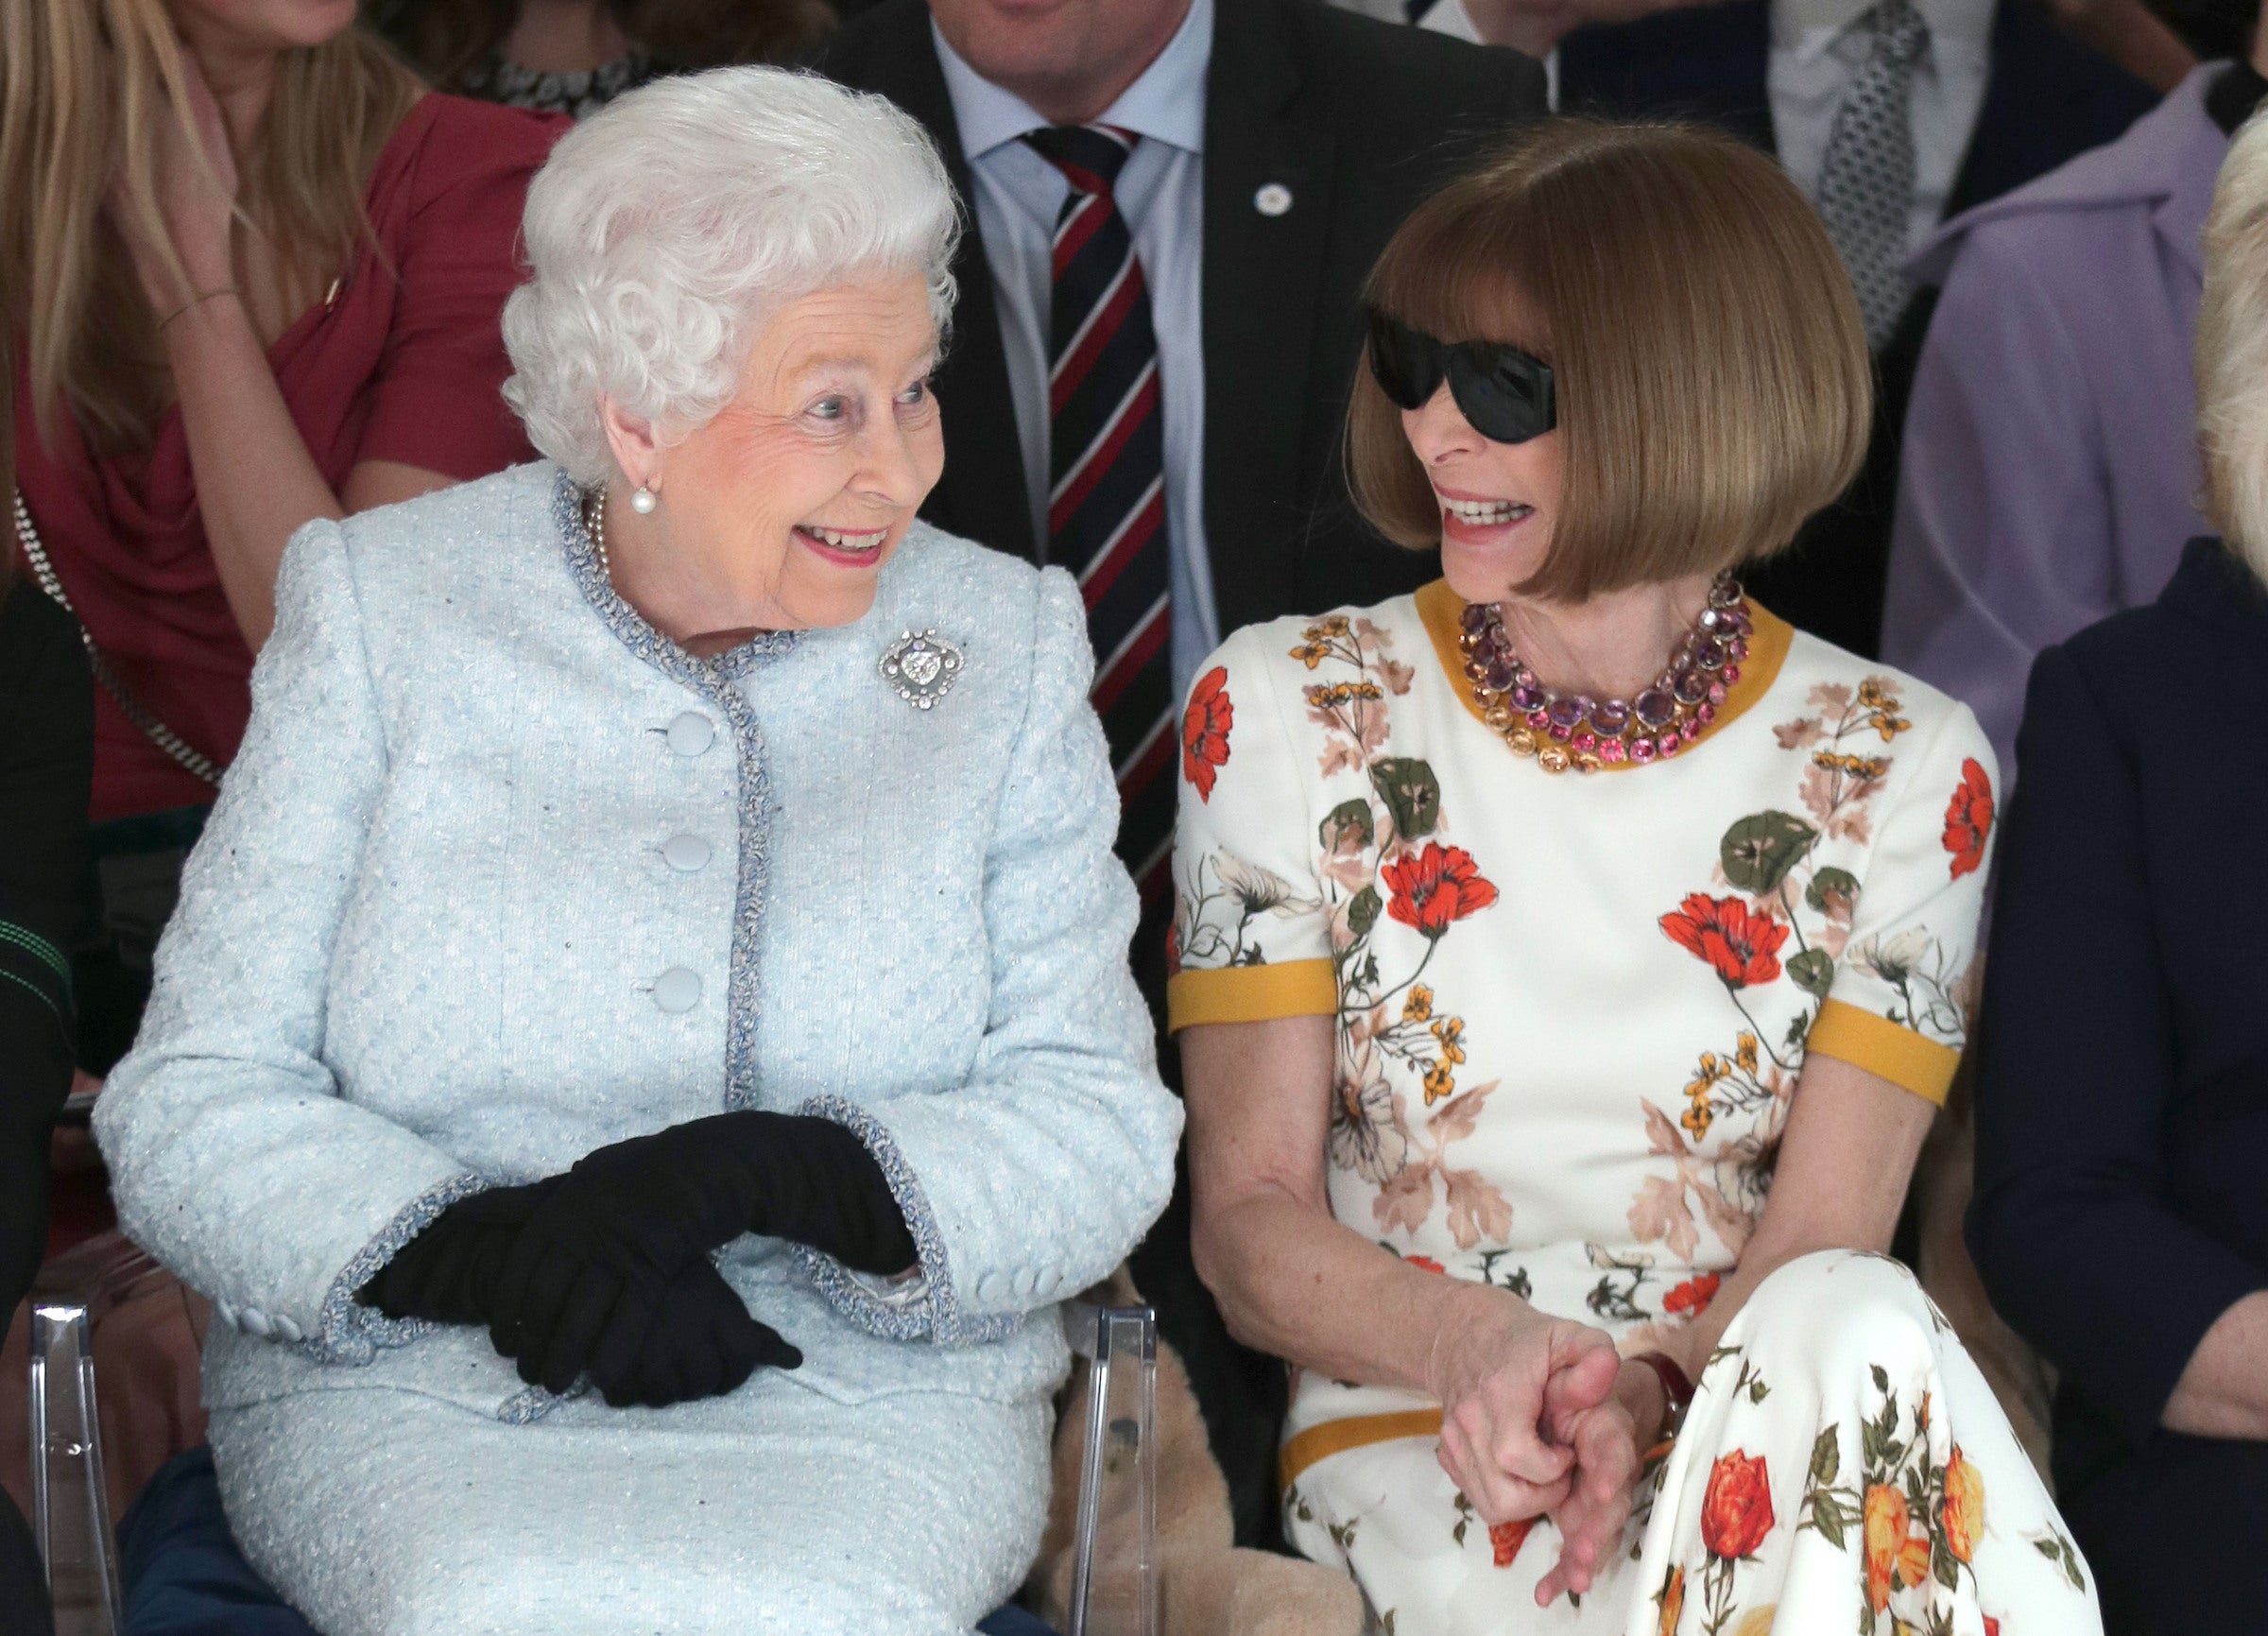 The Queen with Anna Wintour viewing Richard Quinn’s runway show in February